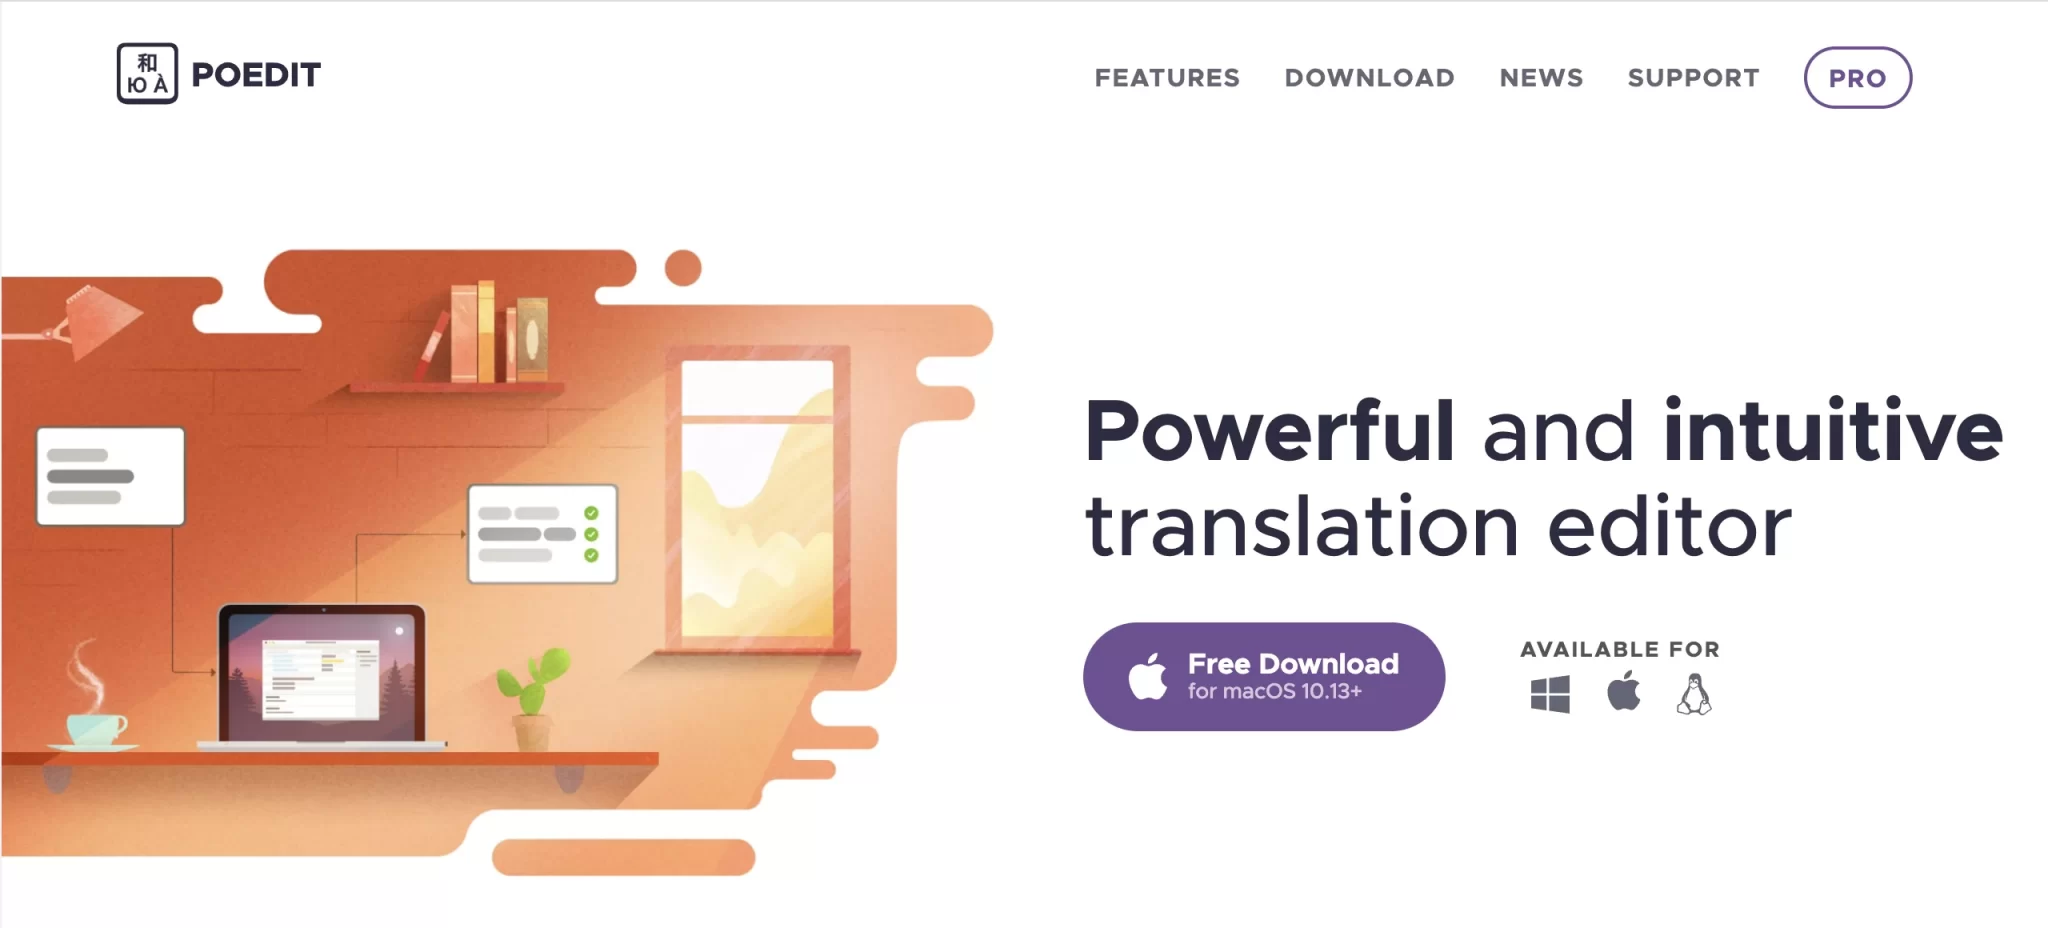 Poedit allows you to translate your WordPress site.